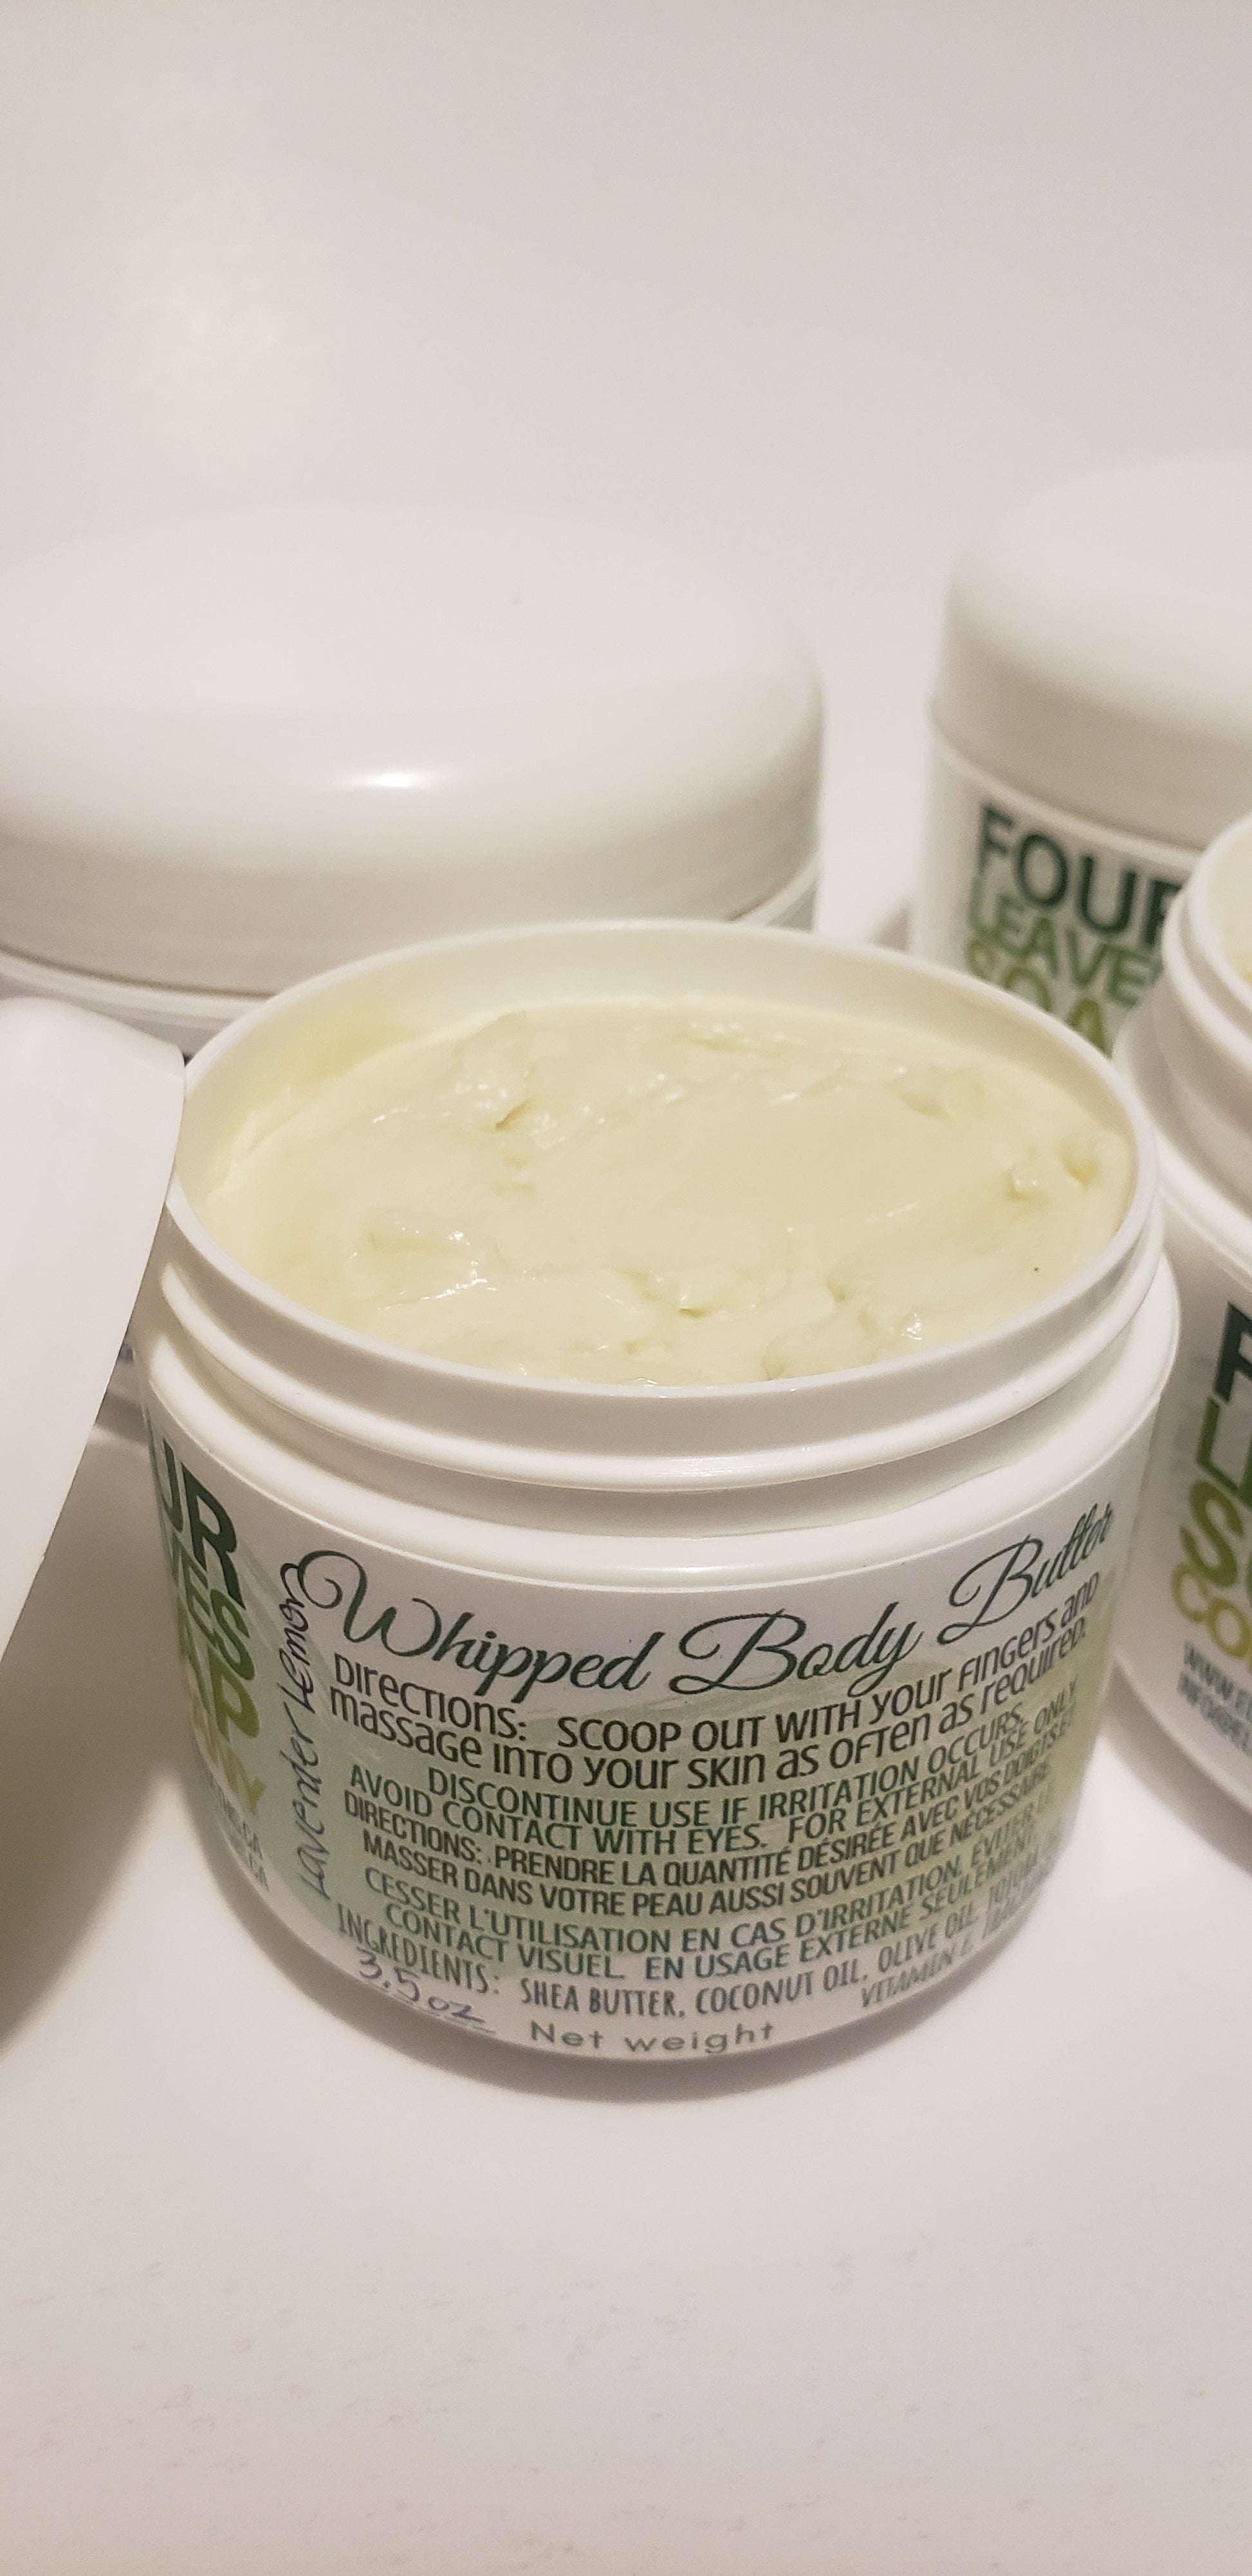 whipped body butter using shea butter, coconut oil and olive oil